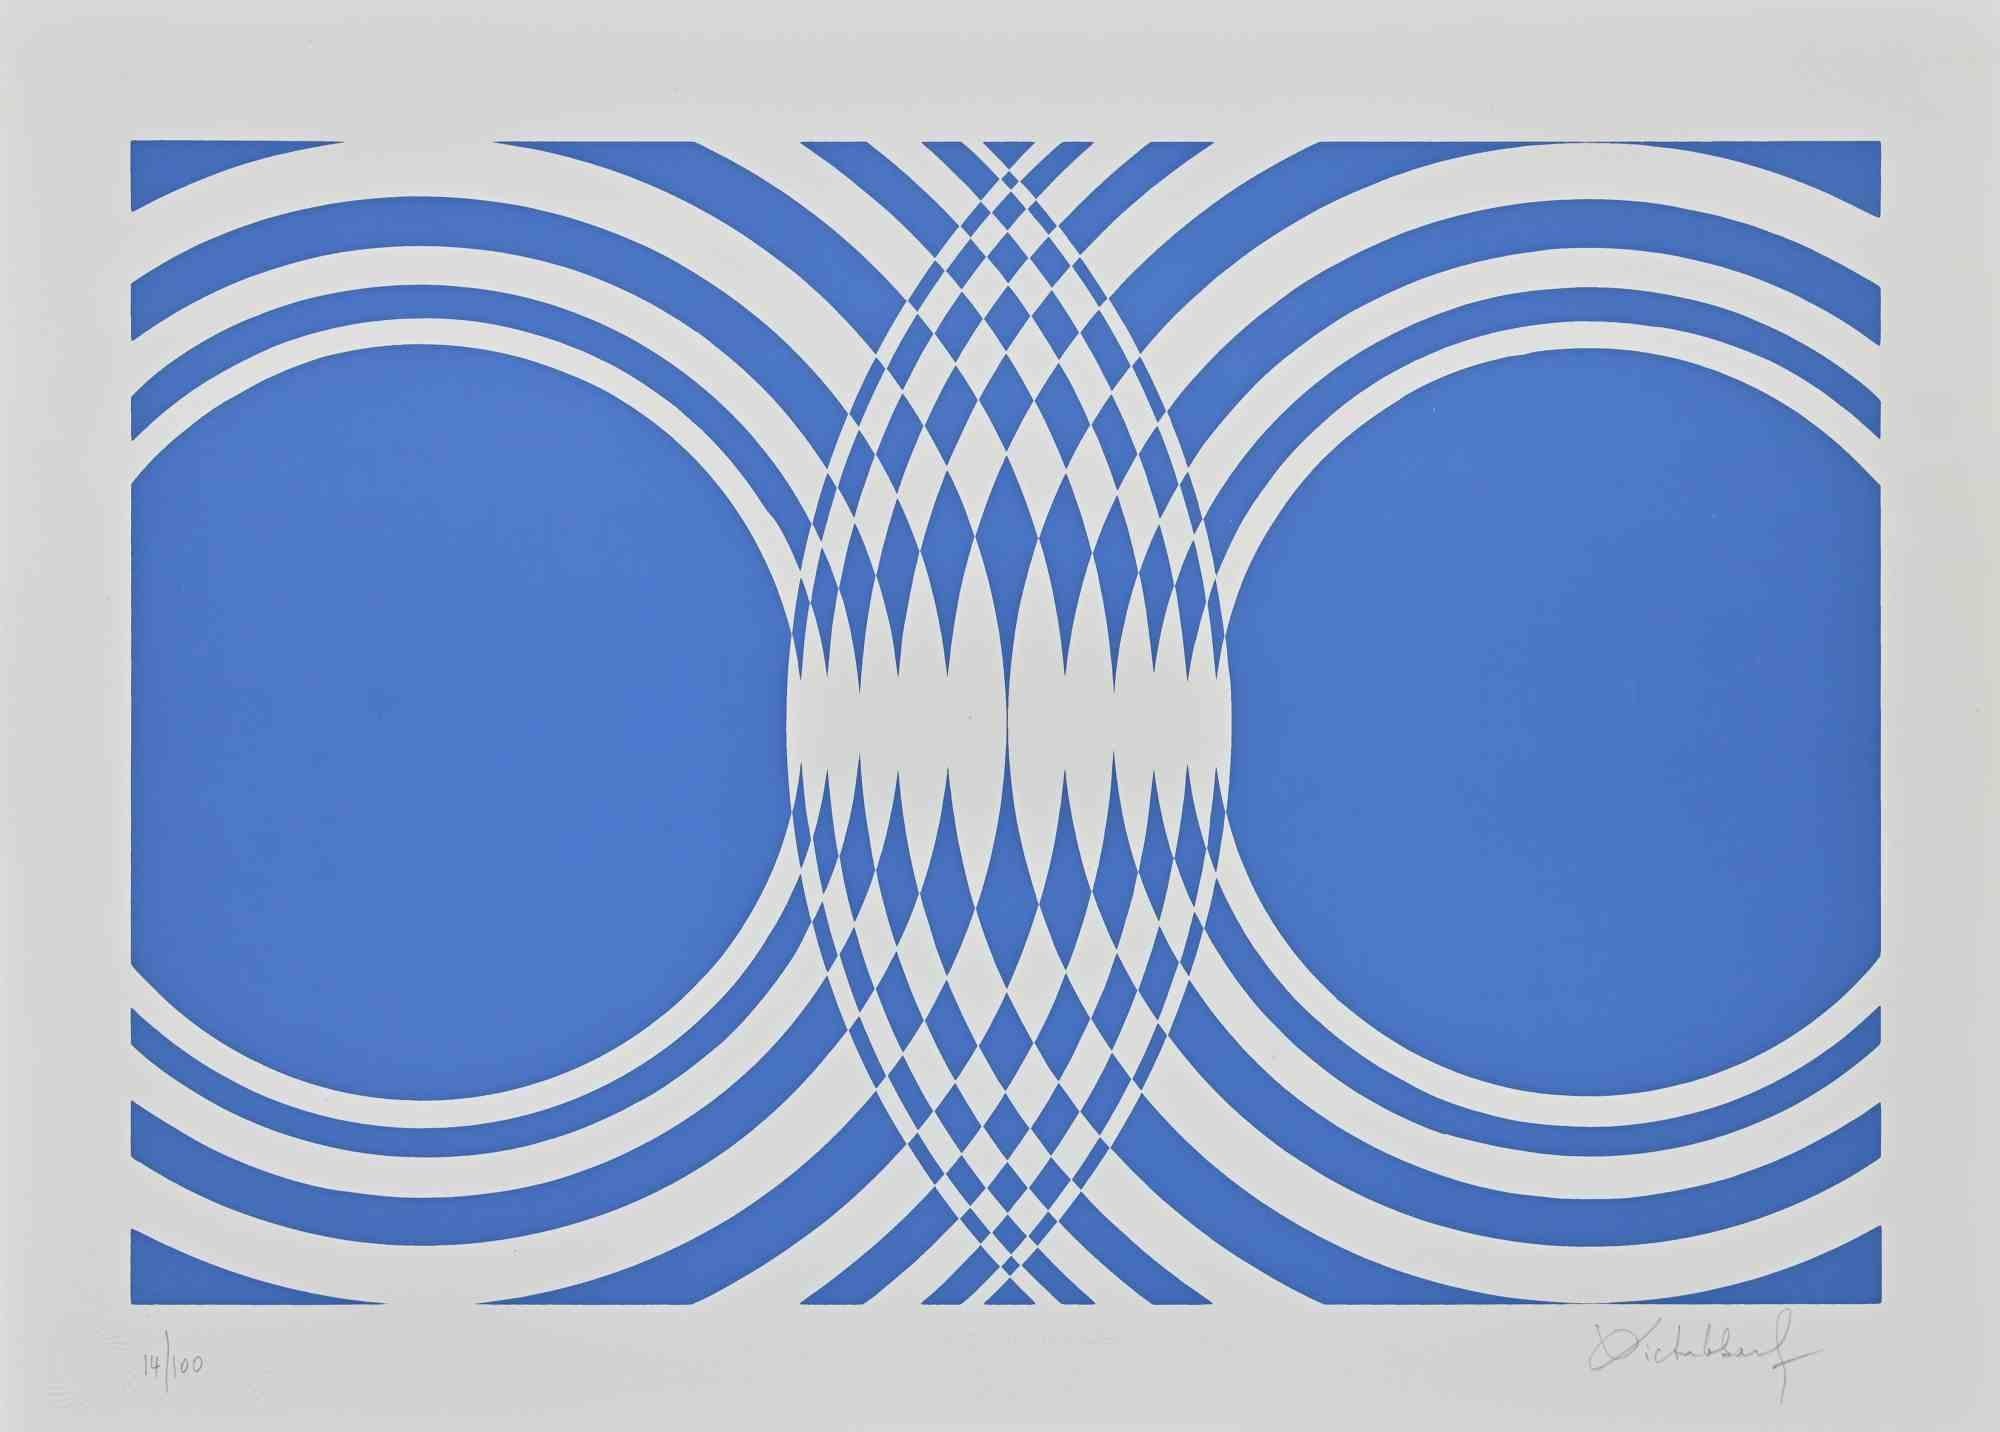 Blue Composition is an original contemporary artwork realized by Victor Debach in the 1970s.

Mixed colored screen print on paper.

Hand signed on the lower right margin.

Numbered on the lower left.

Edition of 14/100